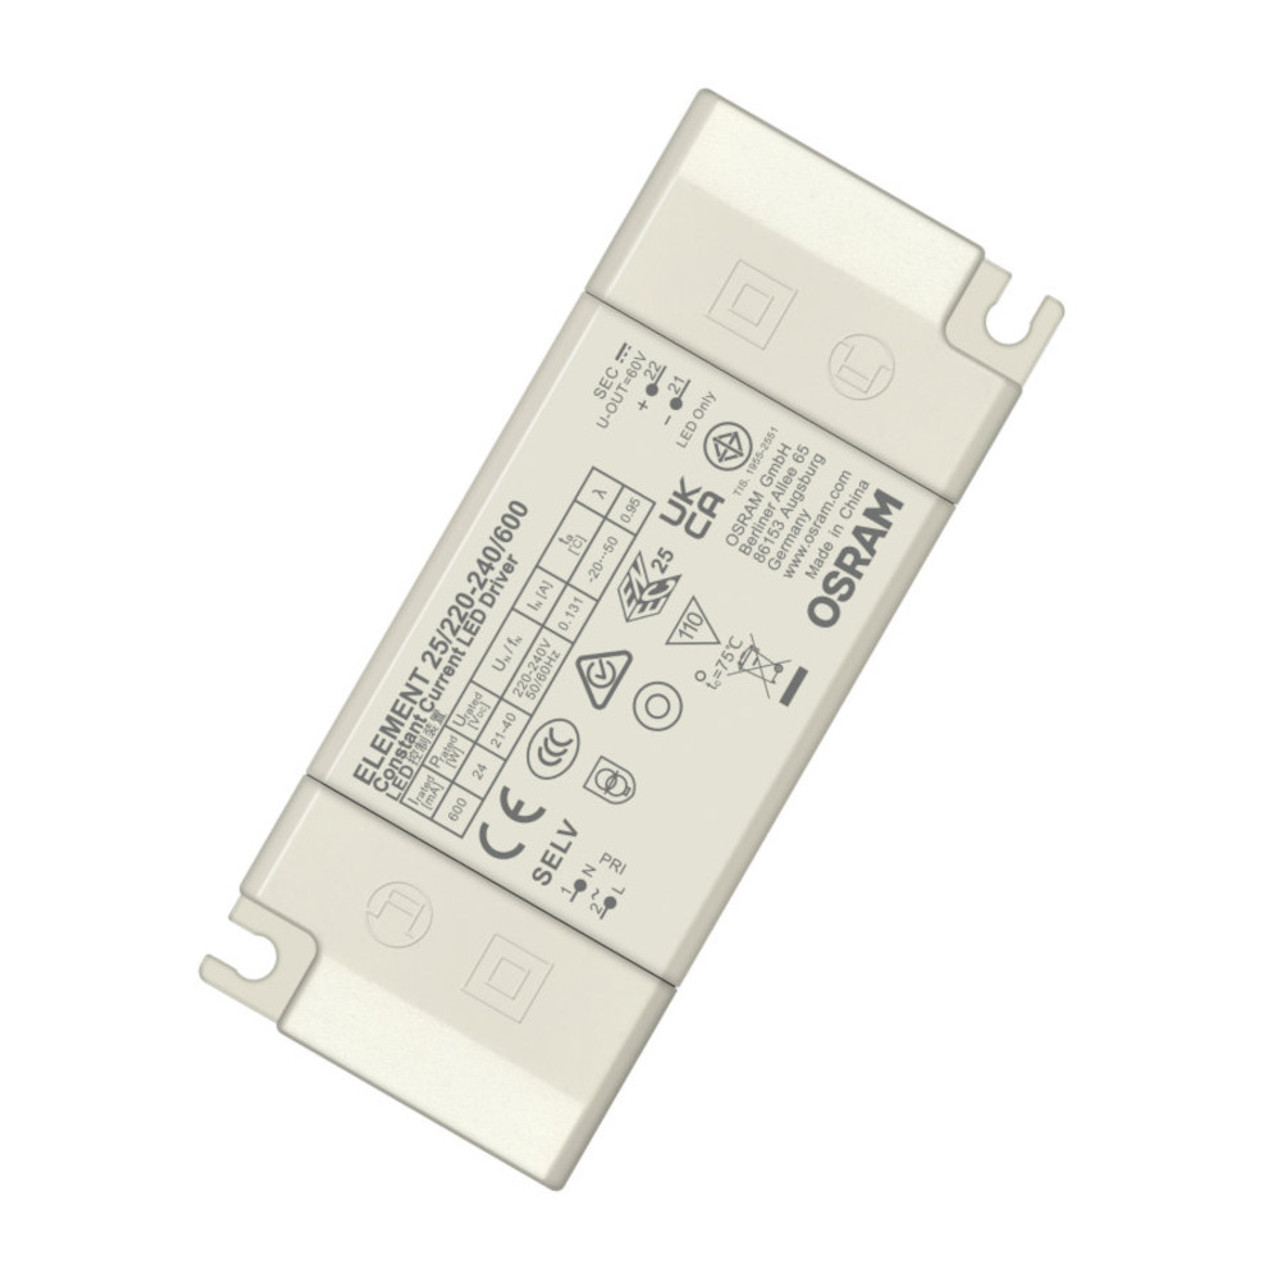 Osram Element G4 25W 600mA Constant Current LED Driver